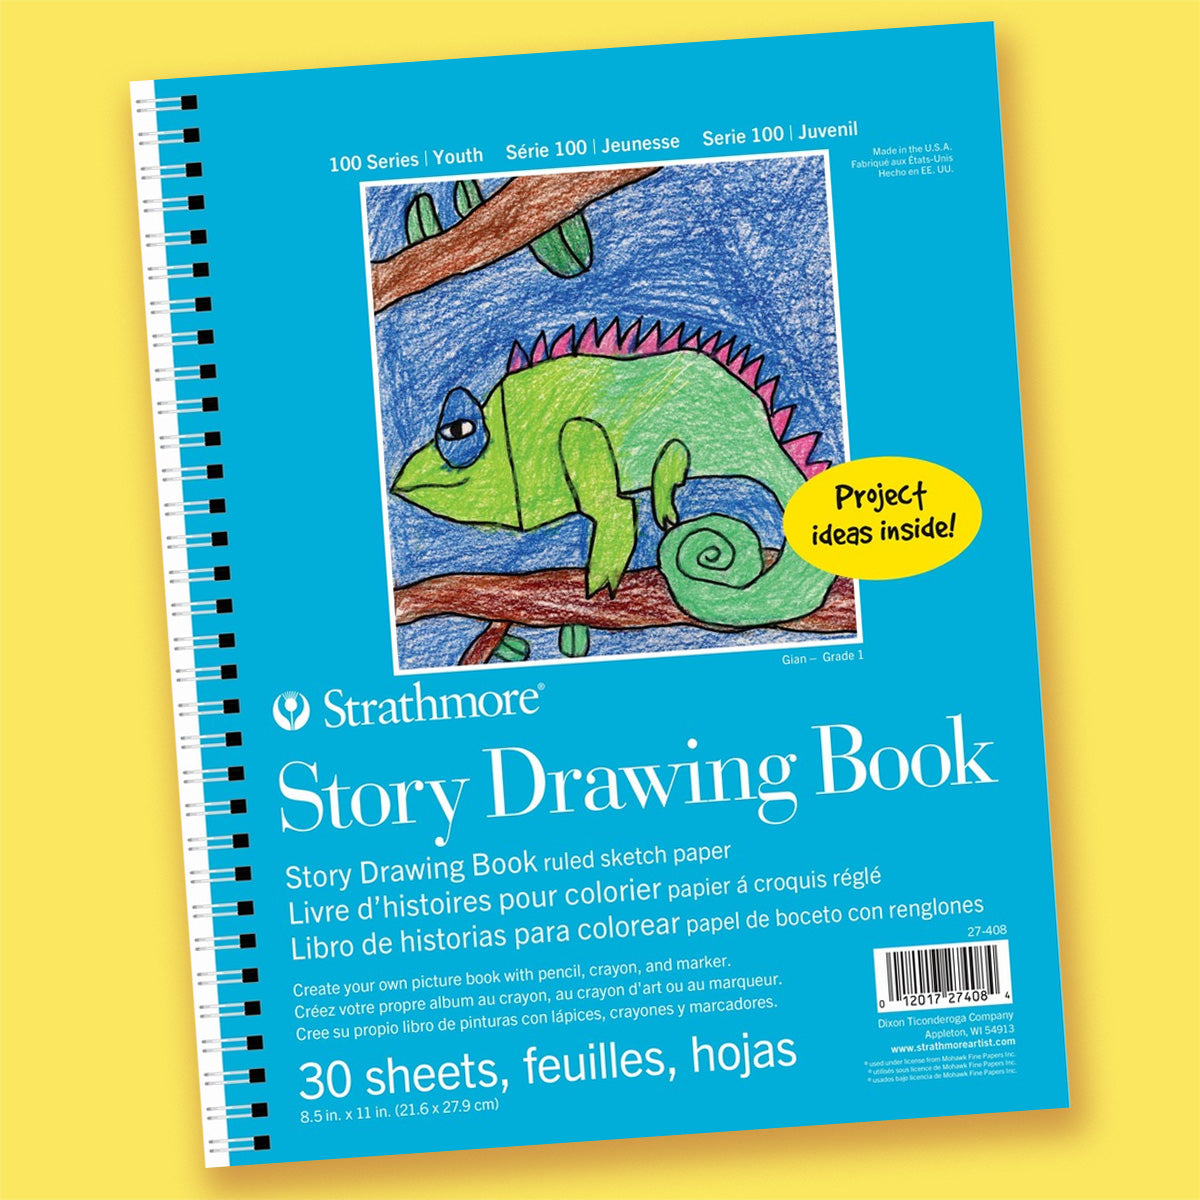 Strathmore 100 Series Story Drawing Book, 8.5" x 11"